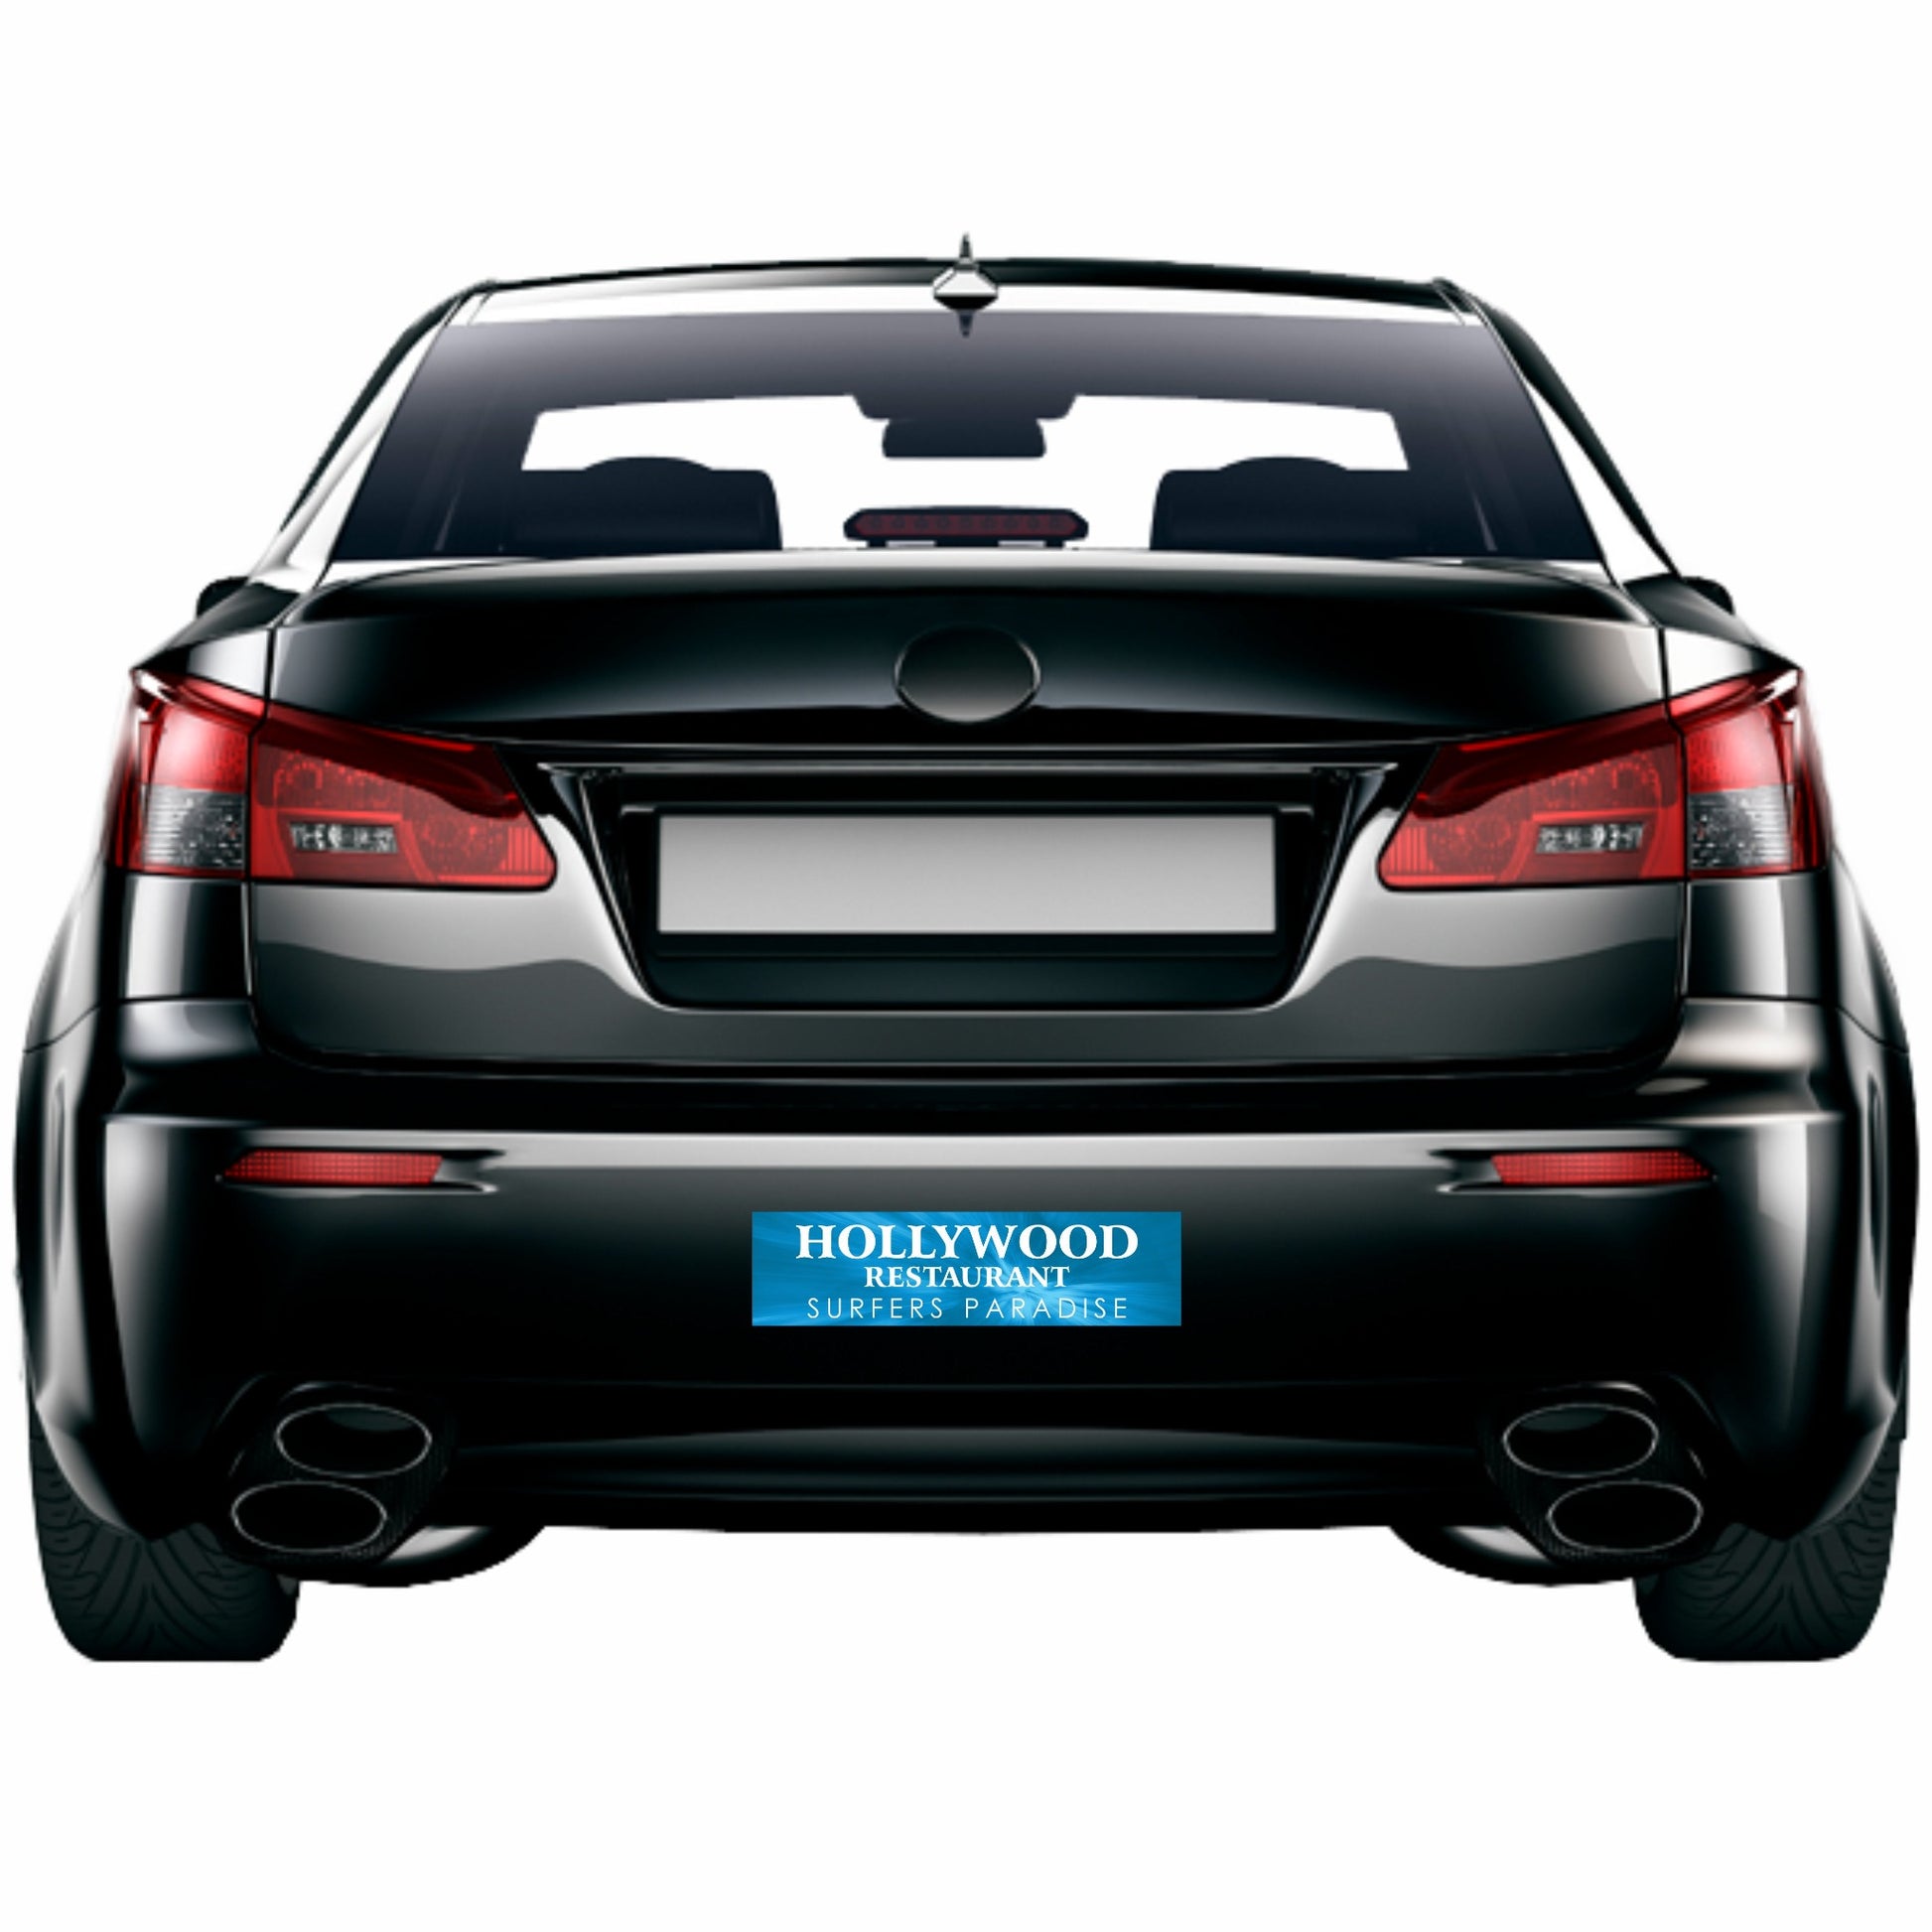 A photograph of a black car with a blue bumper sticker adhered to the rear bumper bar